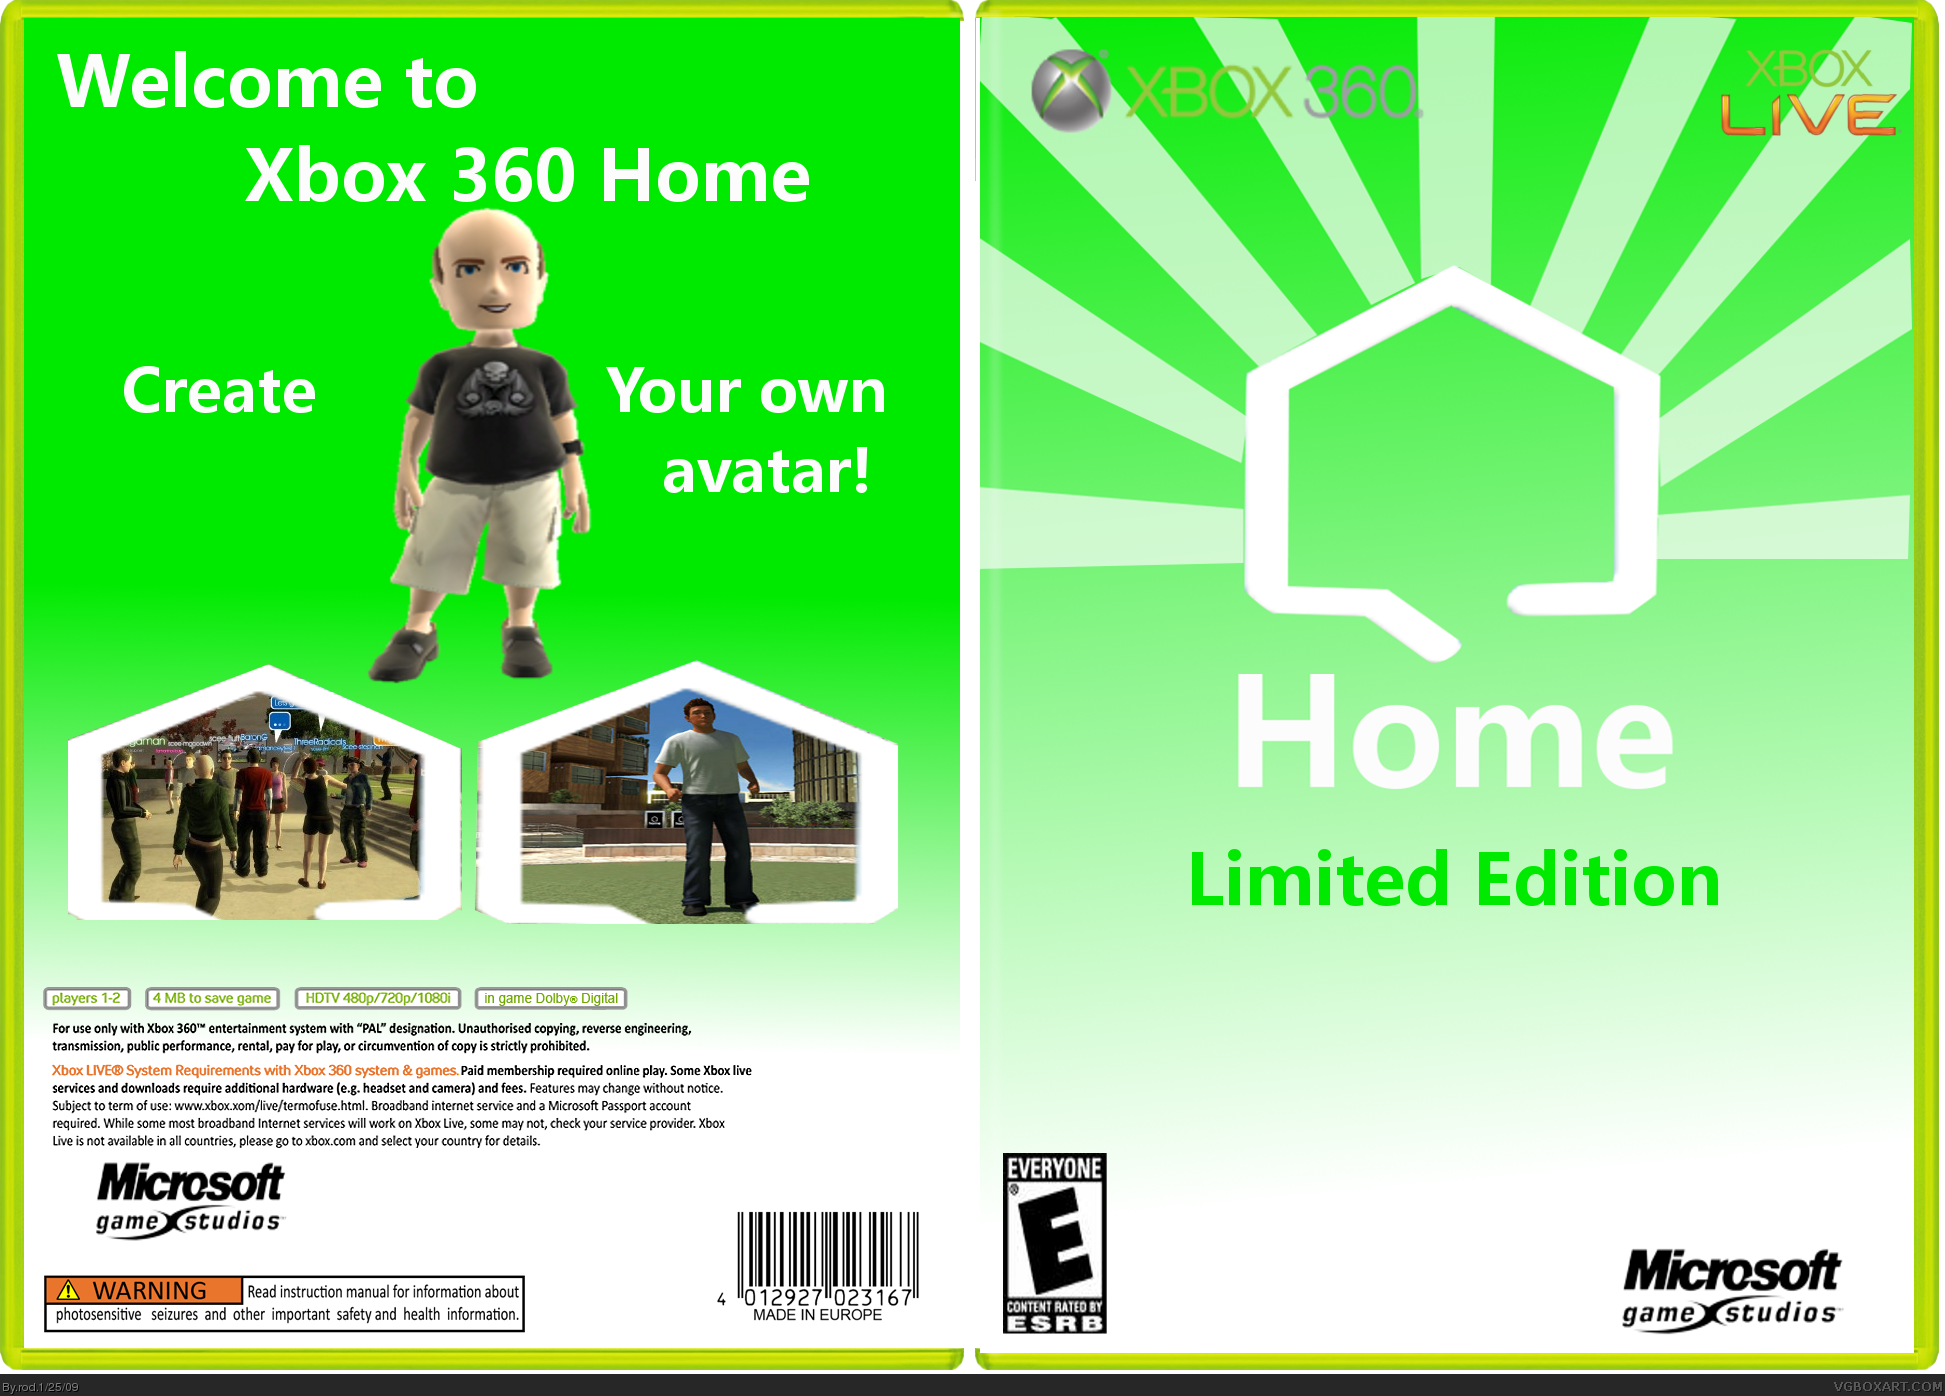 Home: Limited Edition box cover